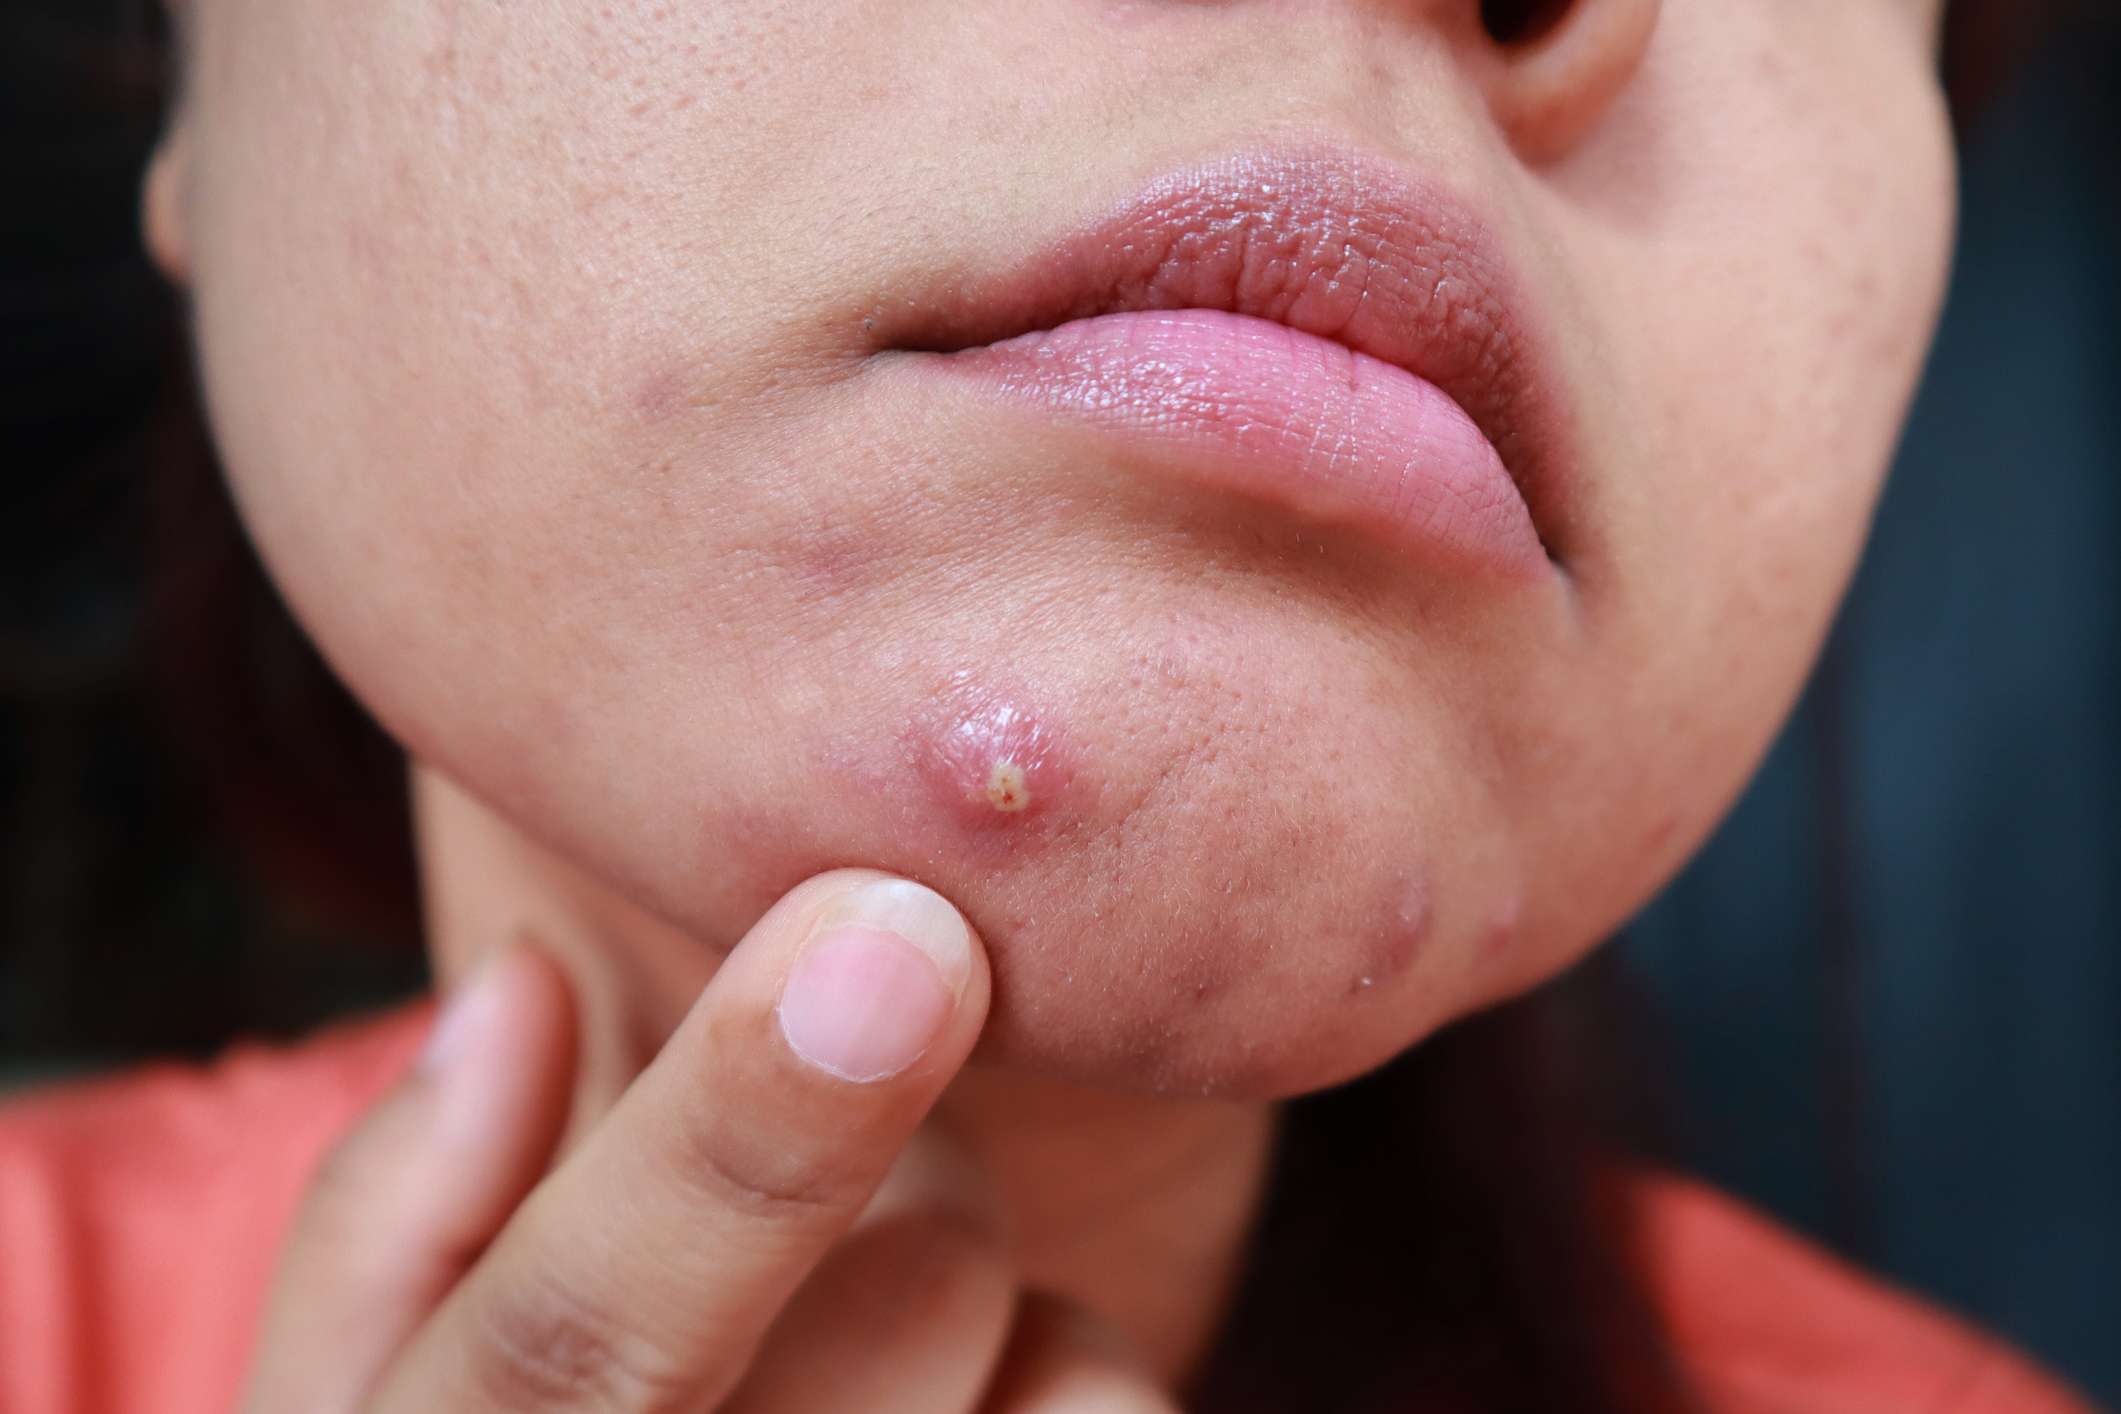 Cystic Acne: Treatment, Causes, and Prevention